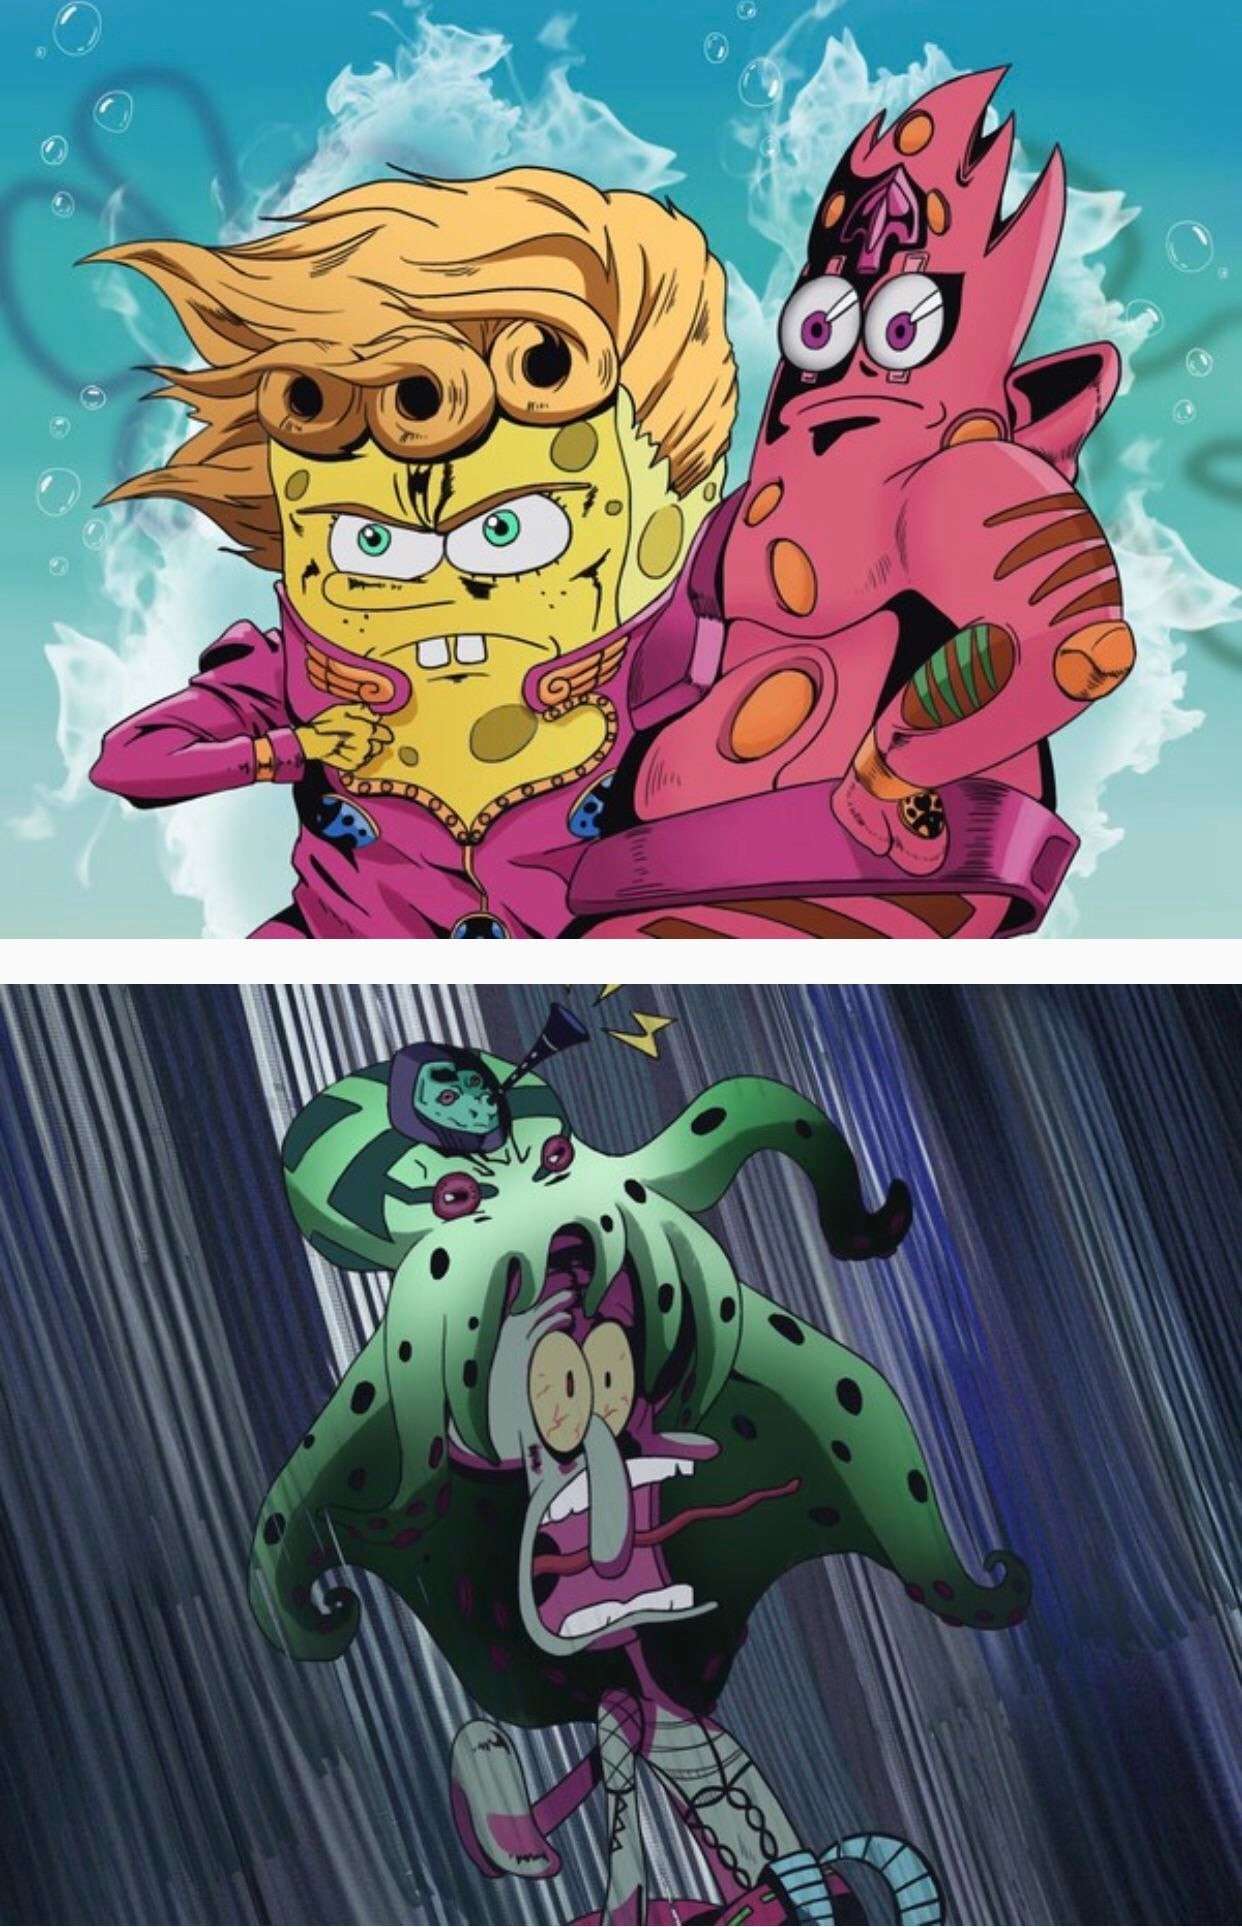 I giorno giovanna have a dream, also adult swim dub is coming on the 26th - meme